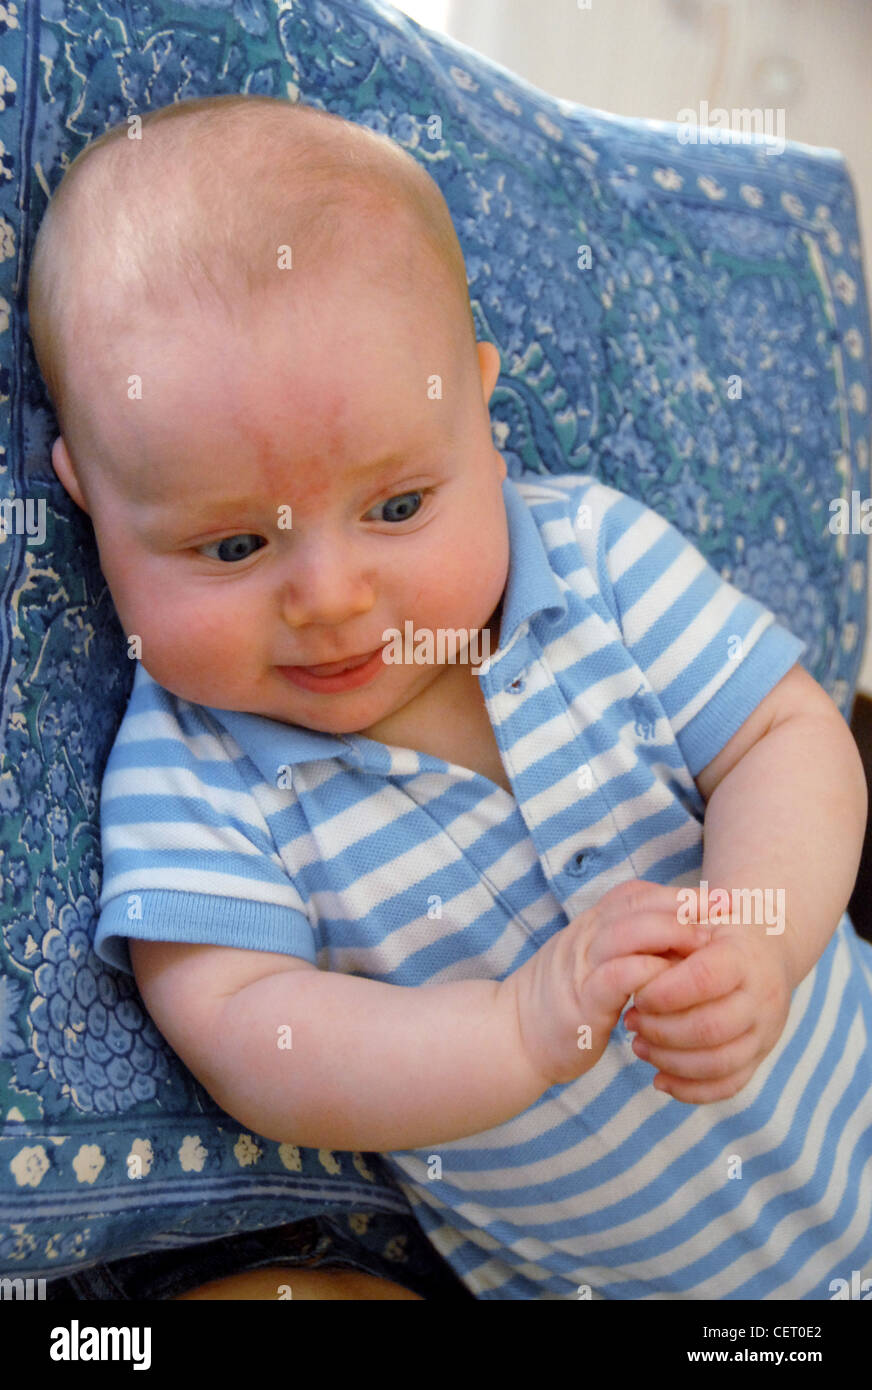 Male infant wearing a blue stripy t shirt resting his head on blue pillow Stock Photo